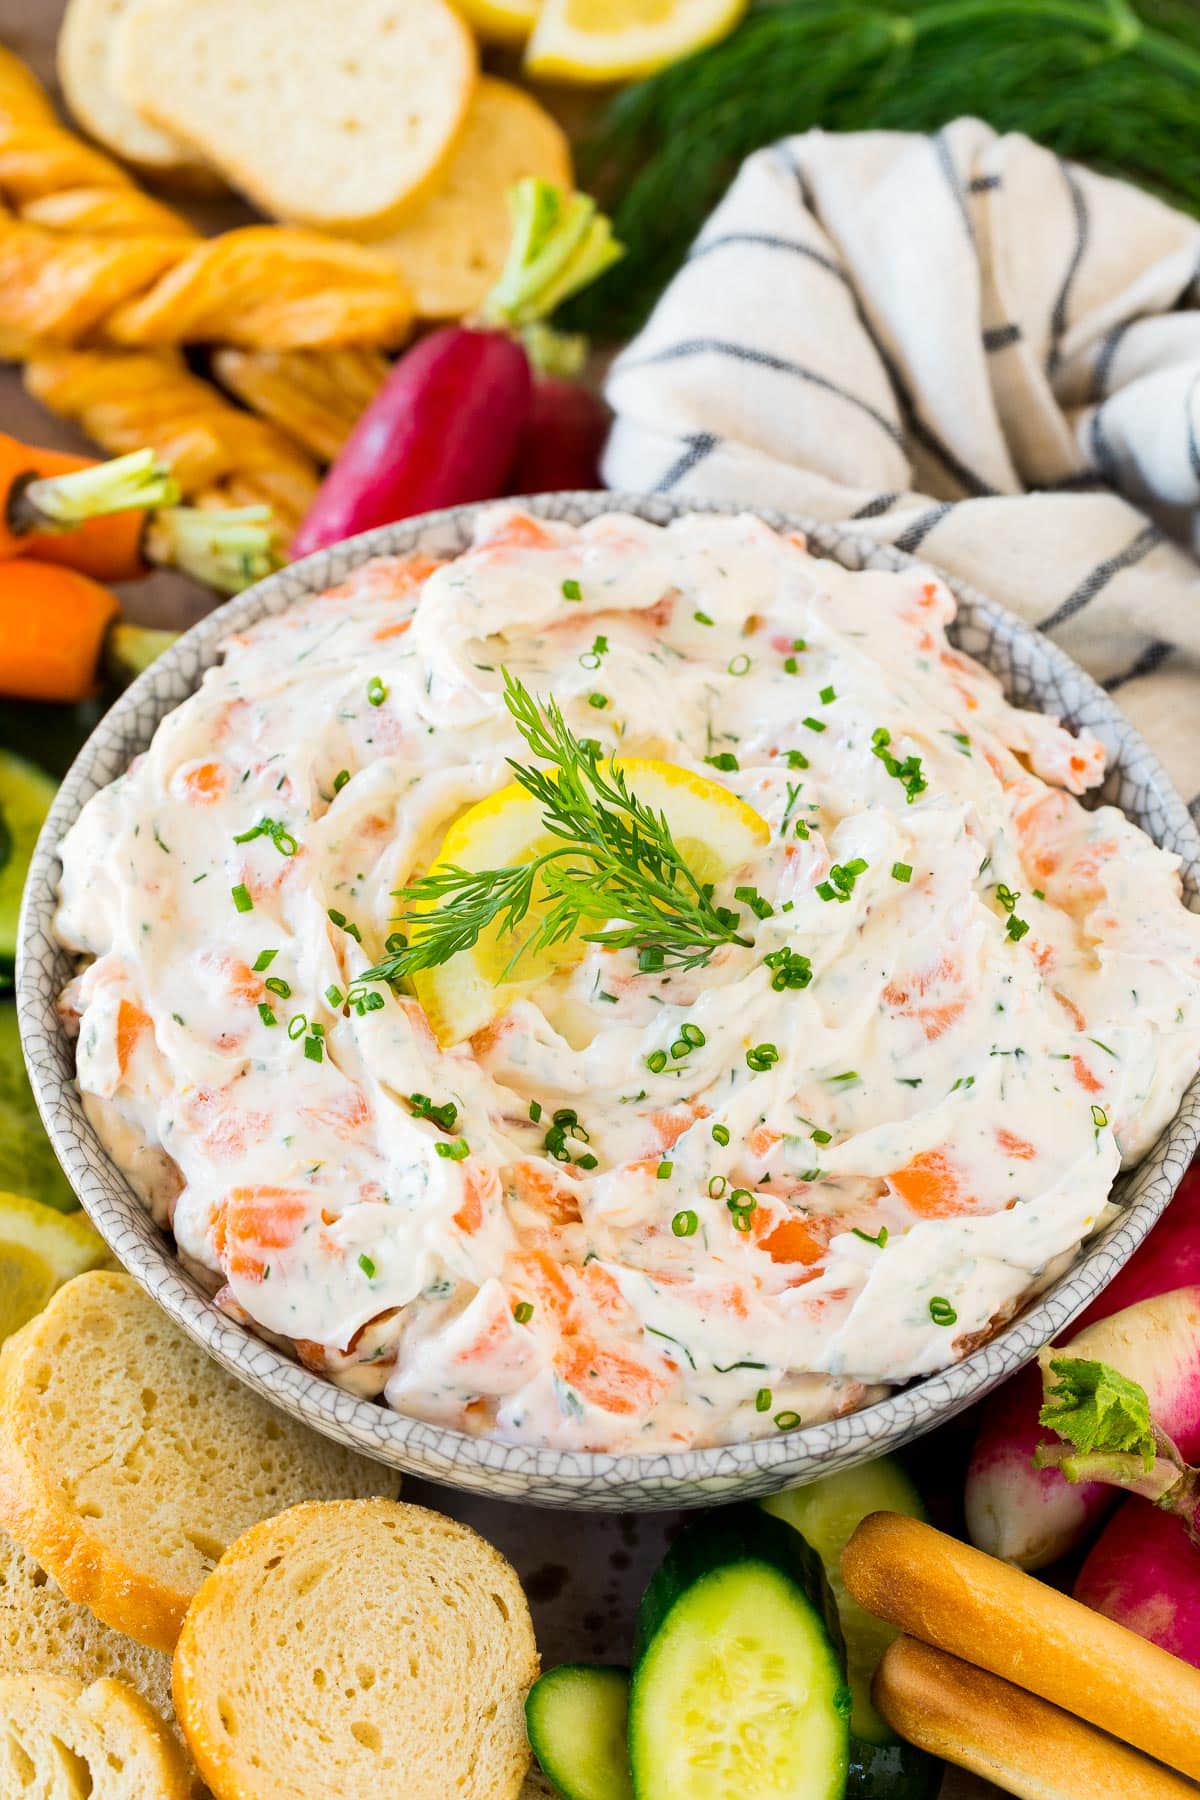 A bowl of smoked salmon dip surrounded by bread, crackers and vegetables.